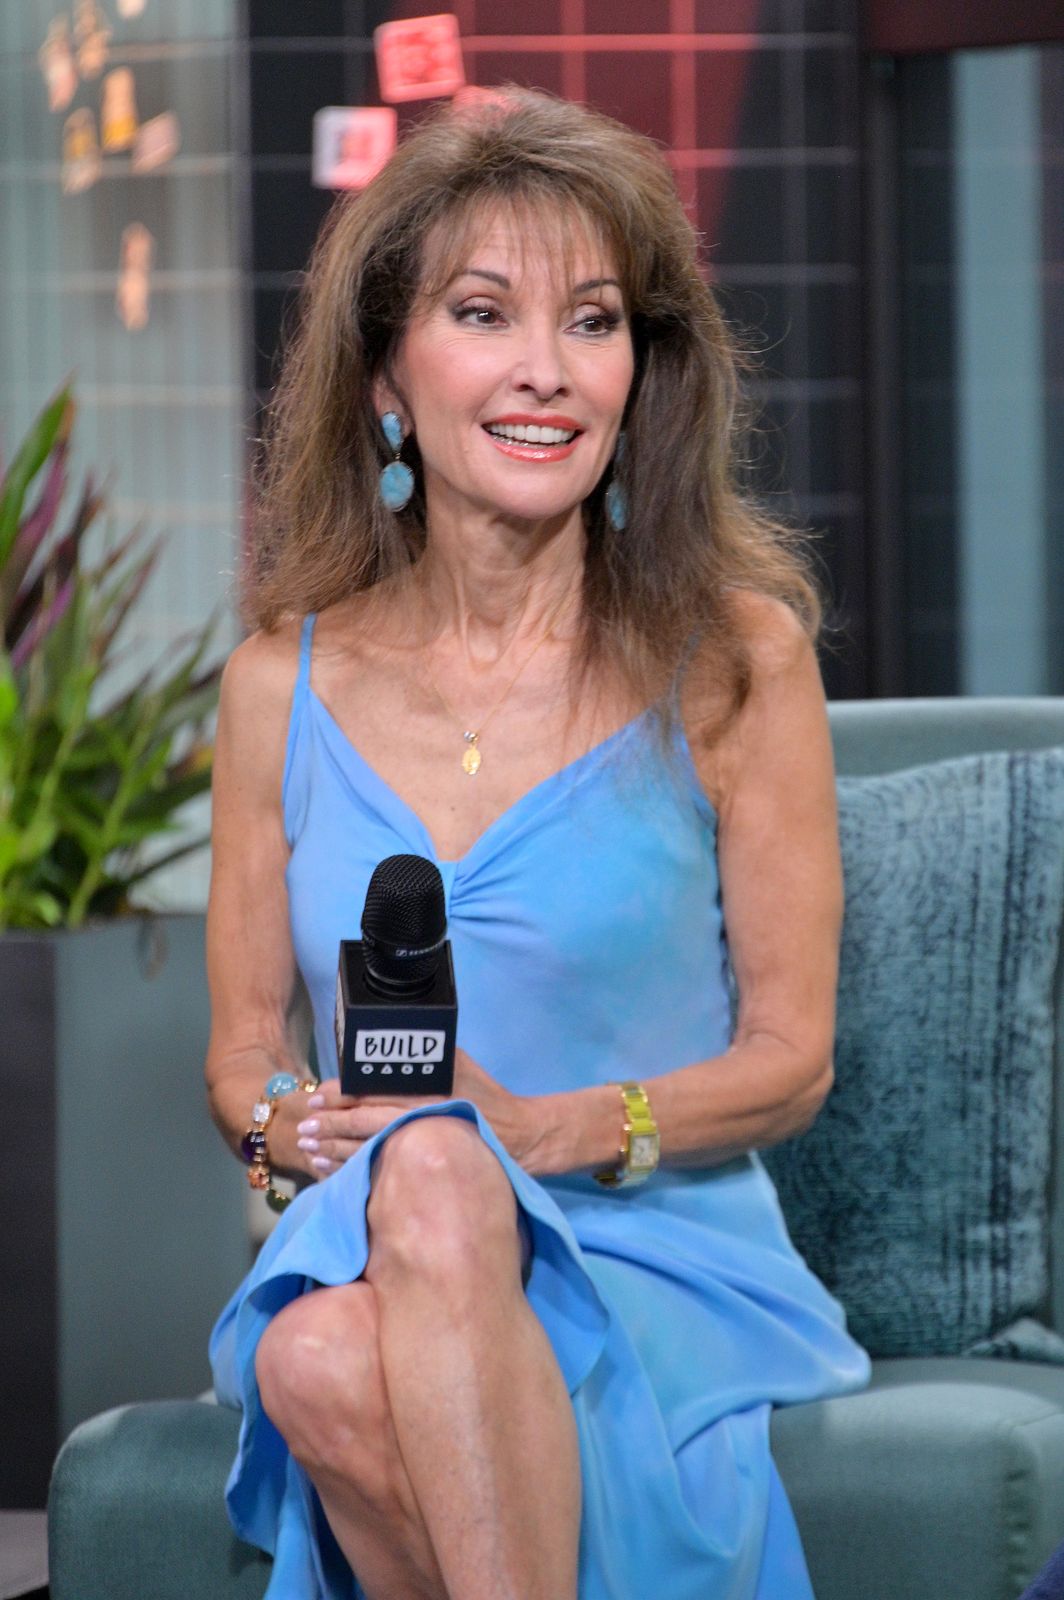 Susan Lucci at Build to discuss the show "Celebrity Autobiography" on July 09, 2019 | Getty Images